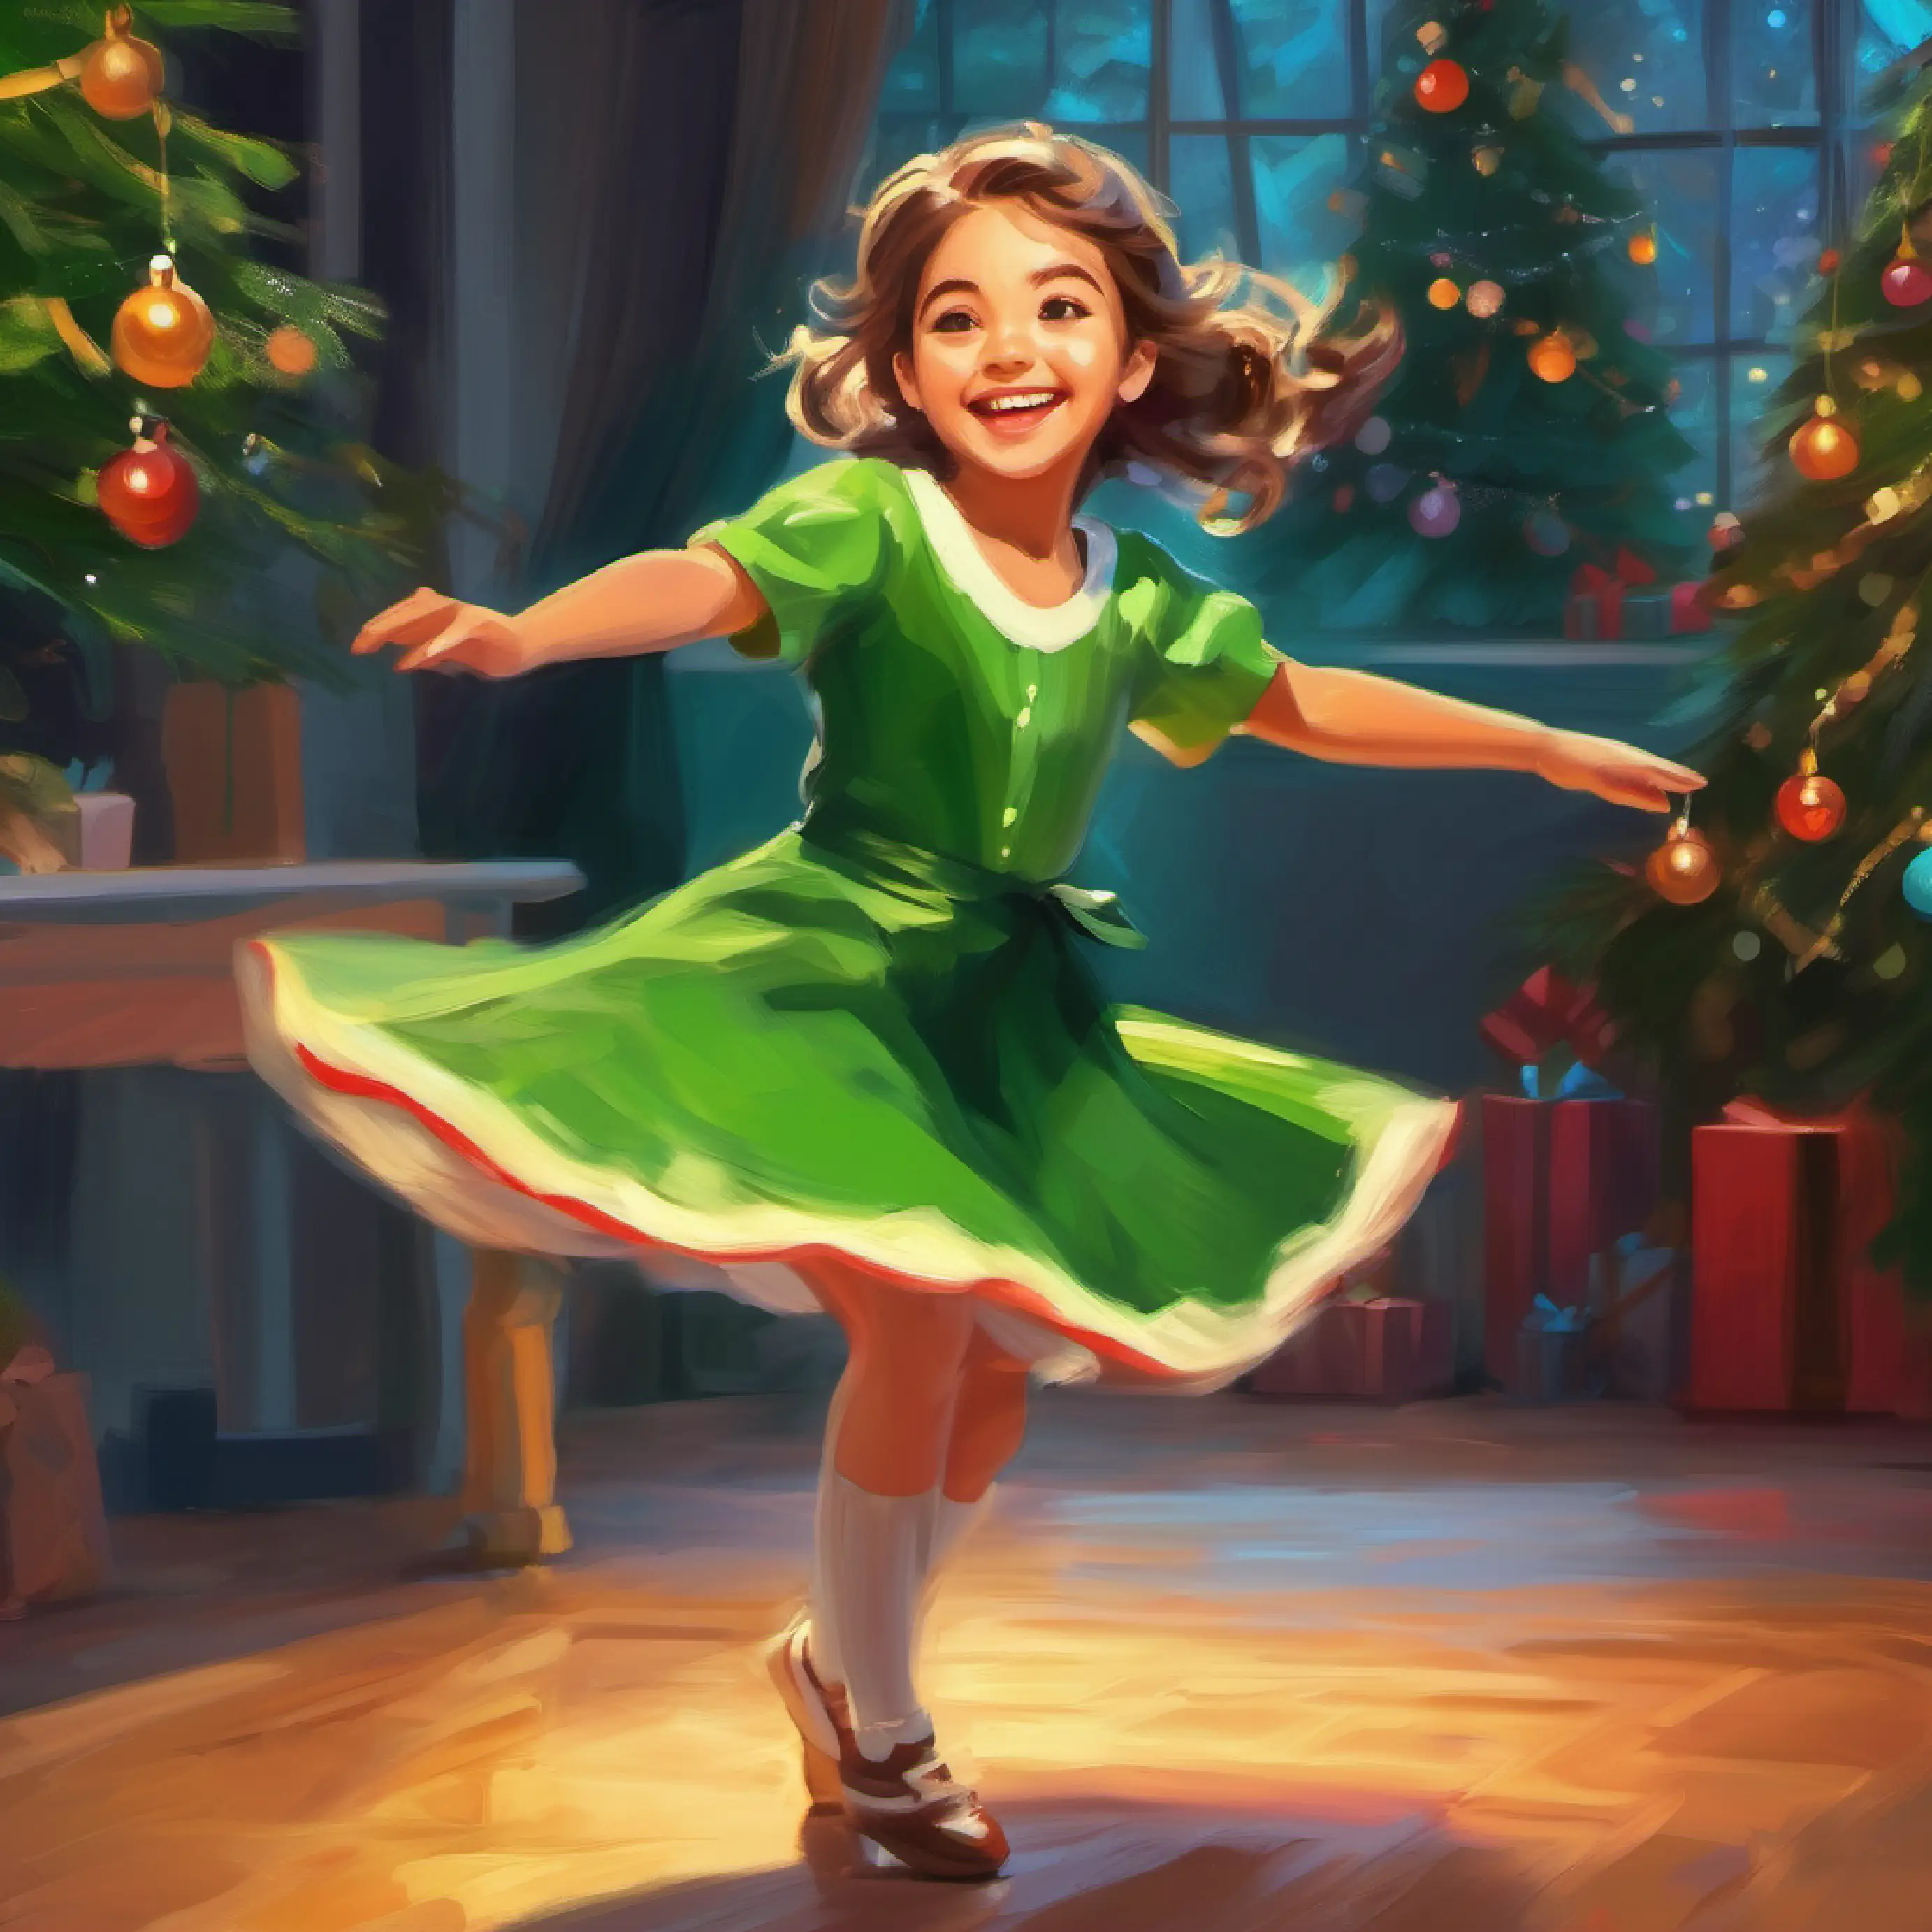 Young girl, cheerful, light-skinned, with bright green eyes stumbling as she attempts to dance.